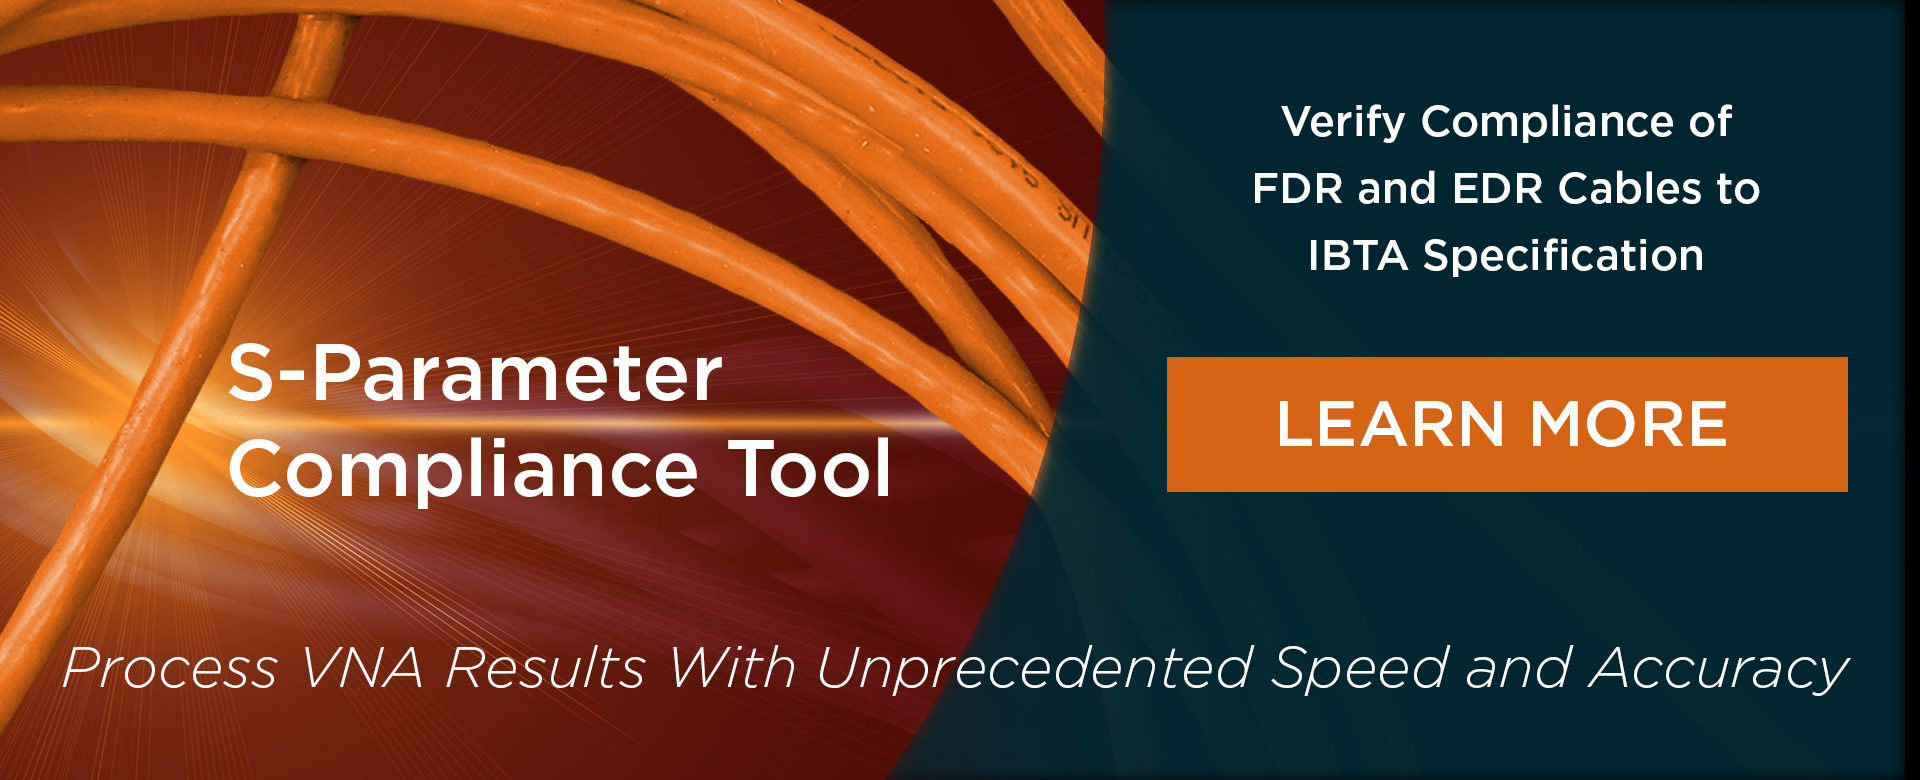 S-Parameter Compliance Tool Verify Compliance of FDR and EDR Cables to IBTA Specification